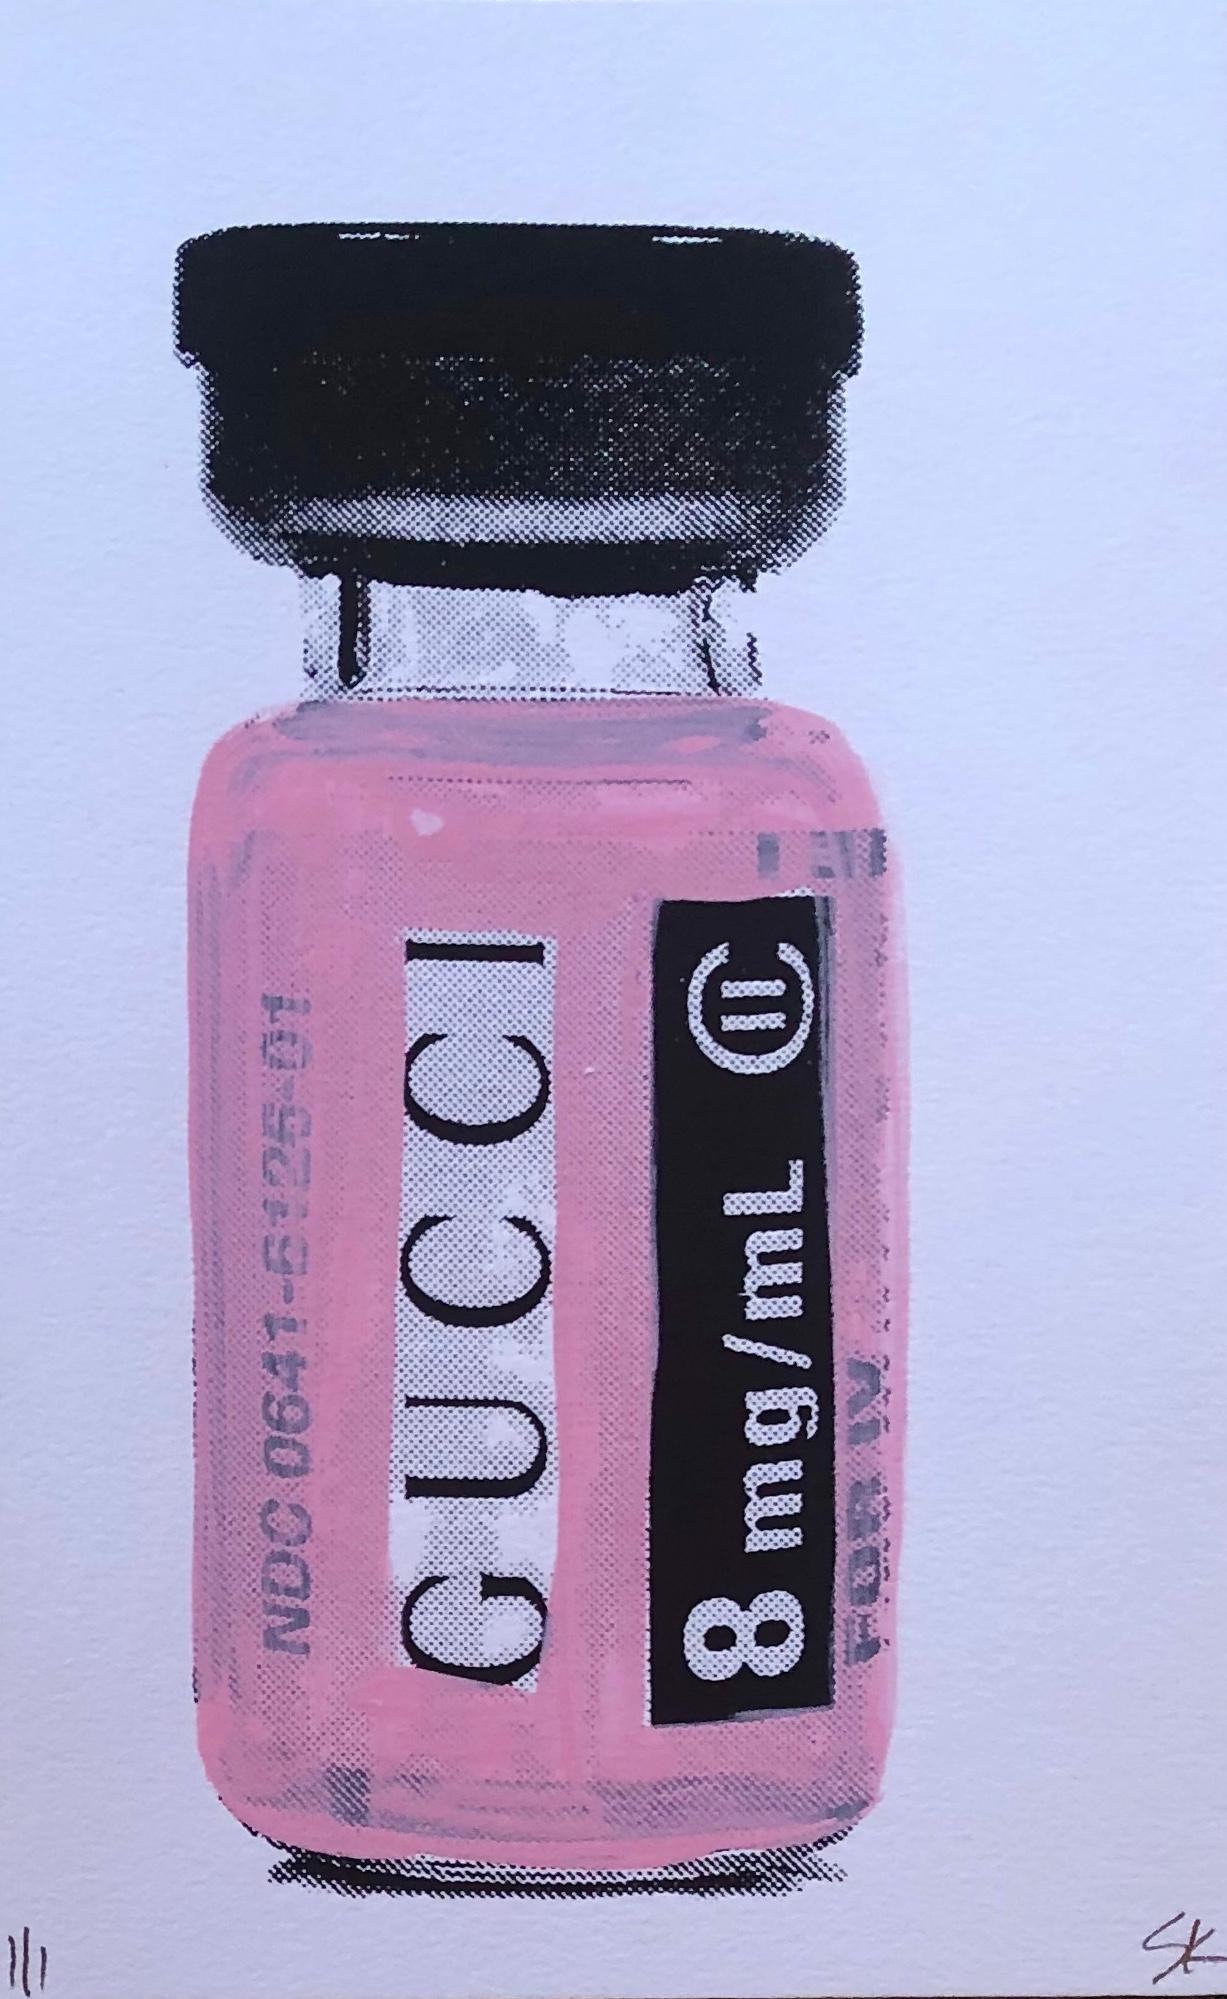 Retail Therapy - GUCCI - Mixed Media Art by Shawn Kolodny